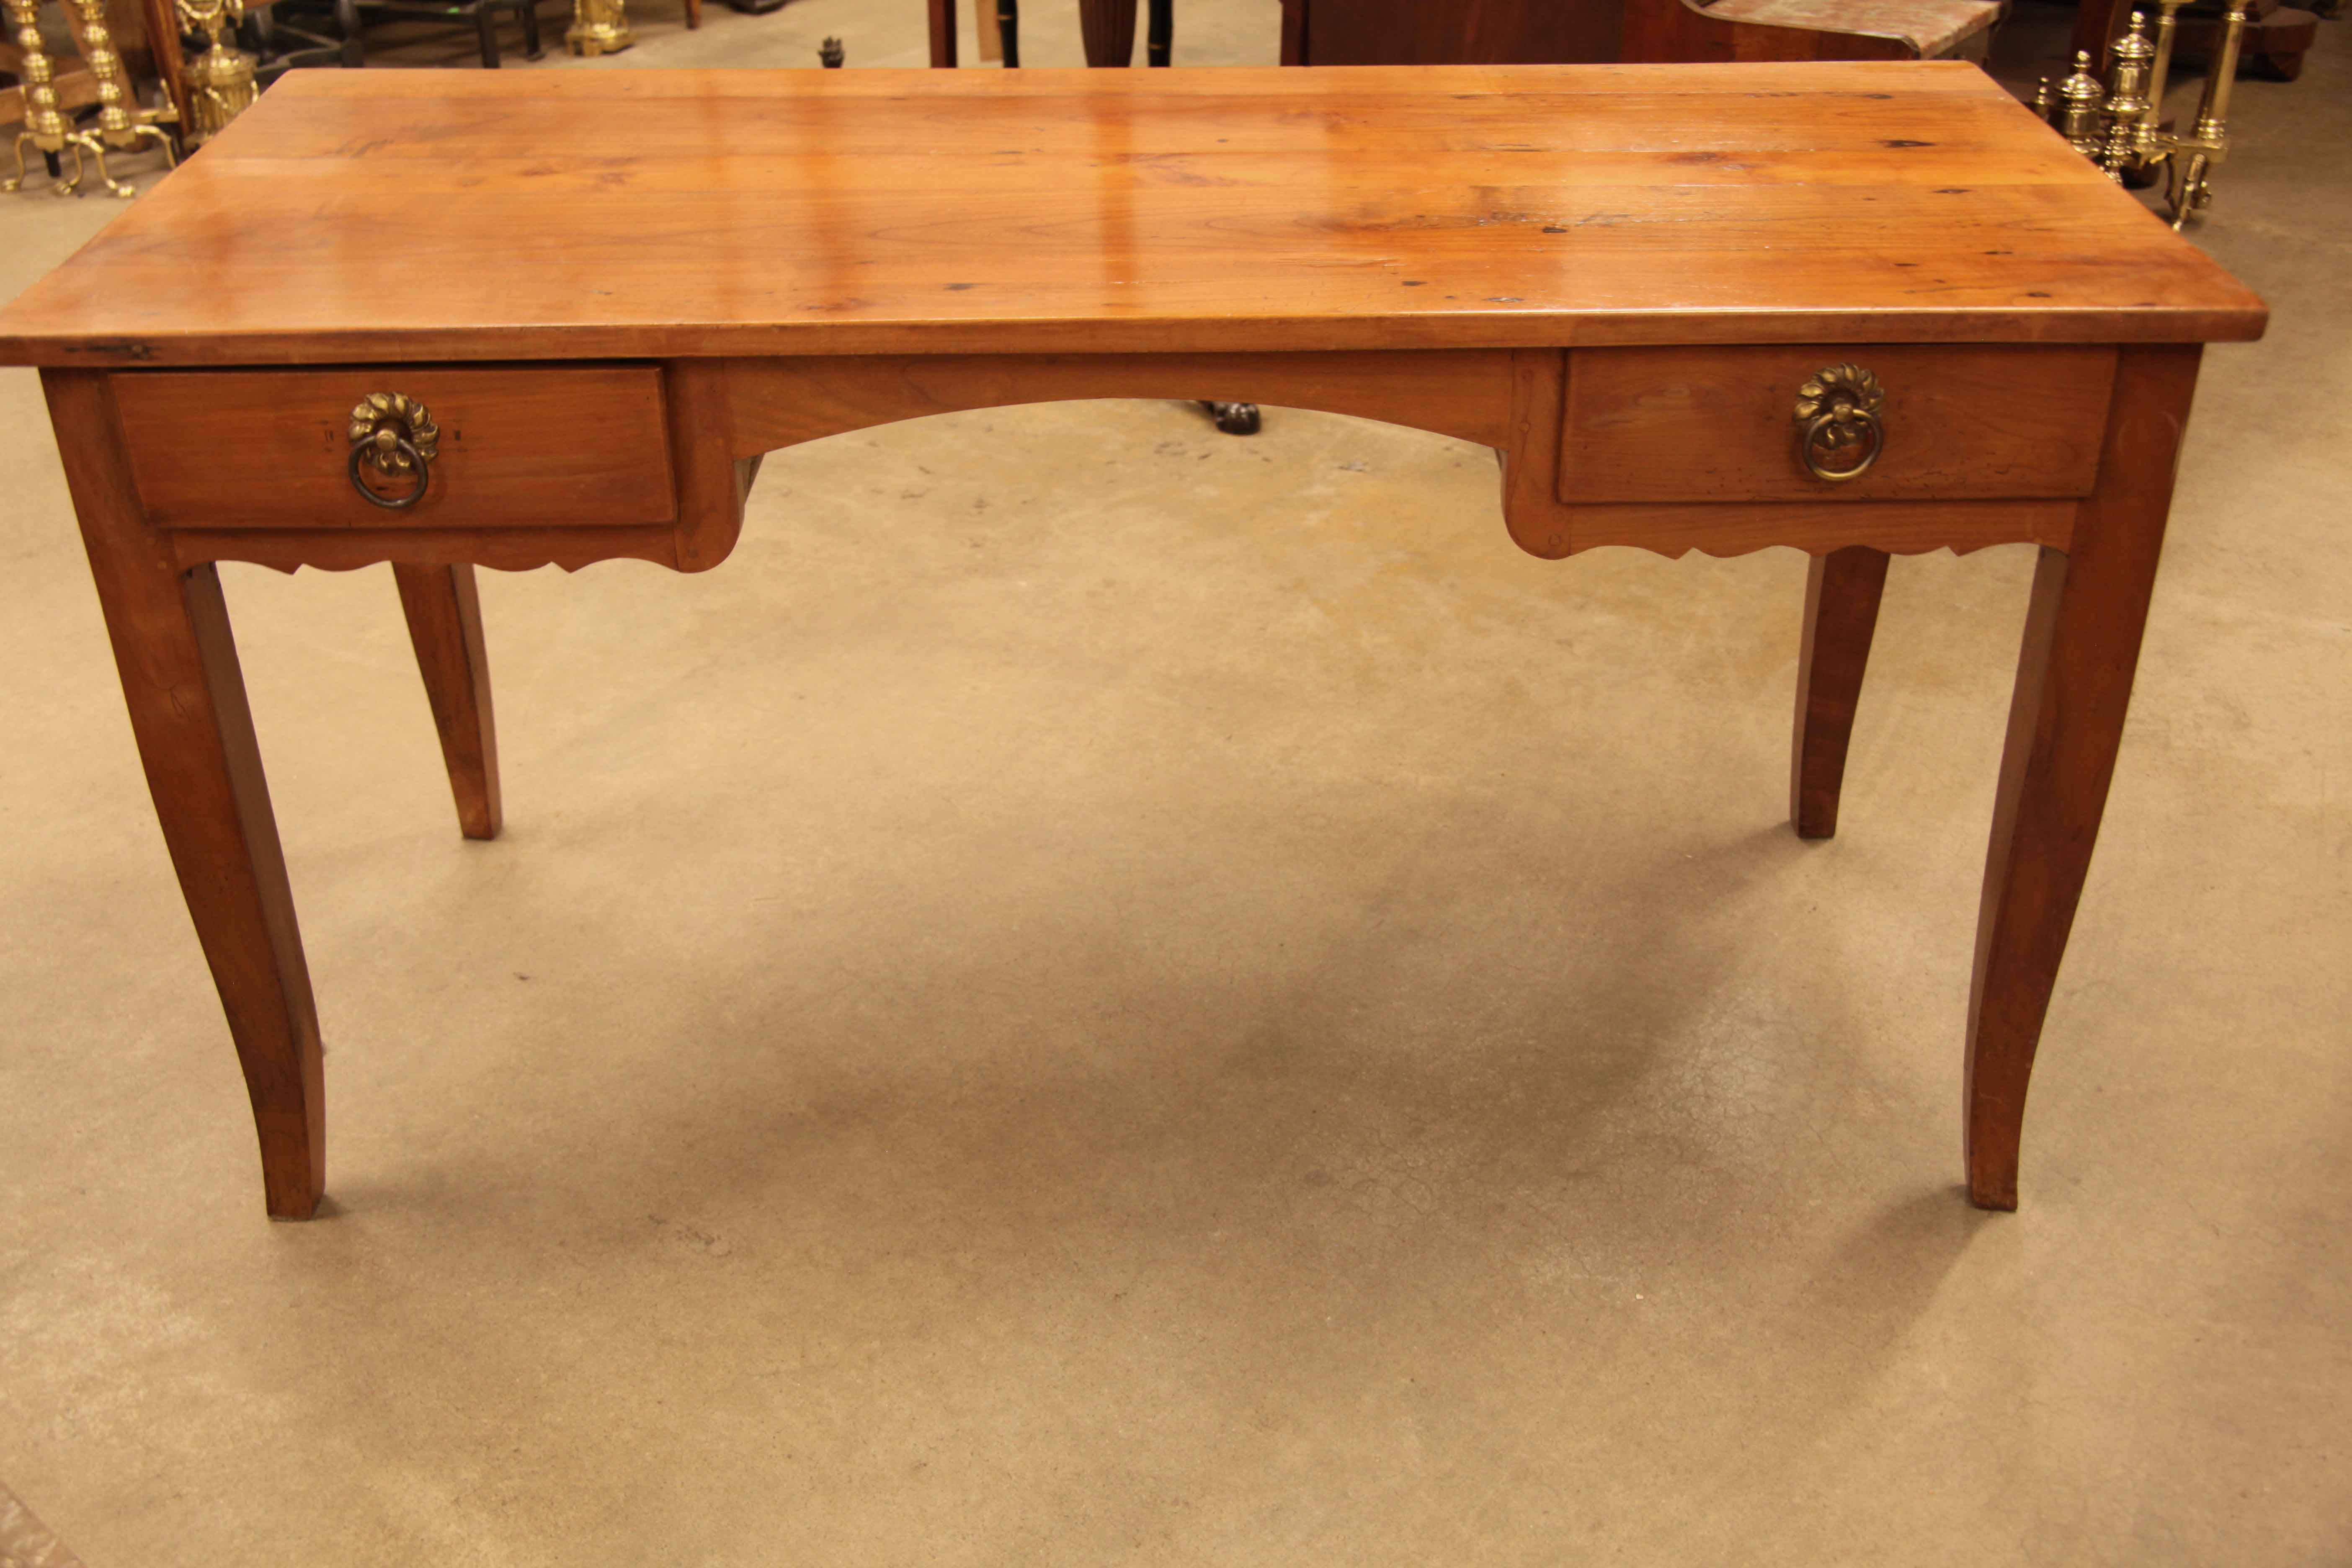 French fruit wood two drawer desk or writing table, the top has outstanding color and patina ; the two drawers with ring pulls and overlapping edges over scalloped aprons, center with arched apron with plenty of sitting clearance The square legs